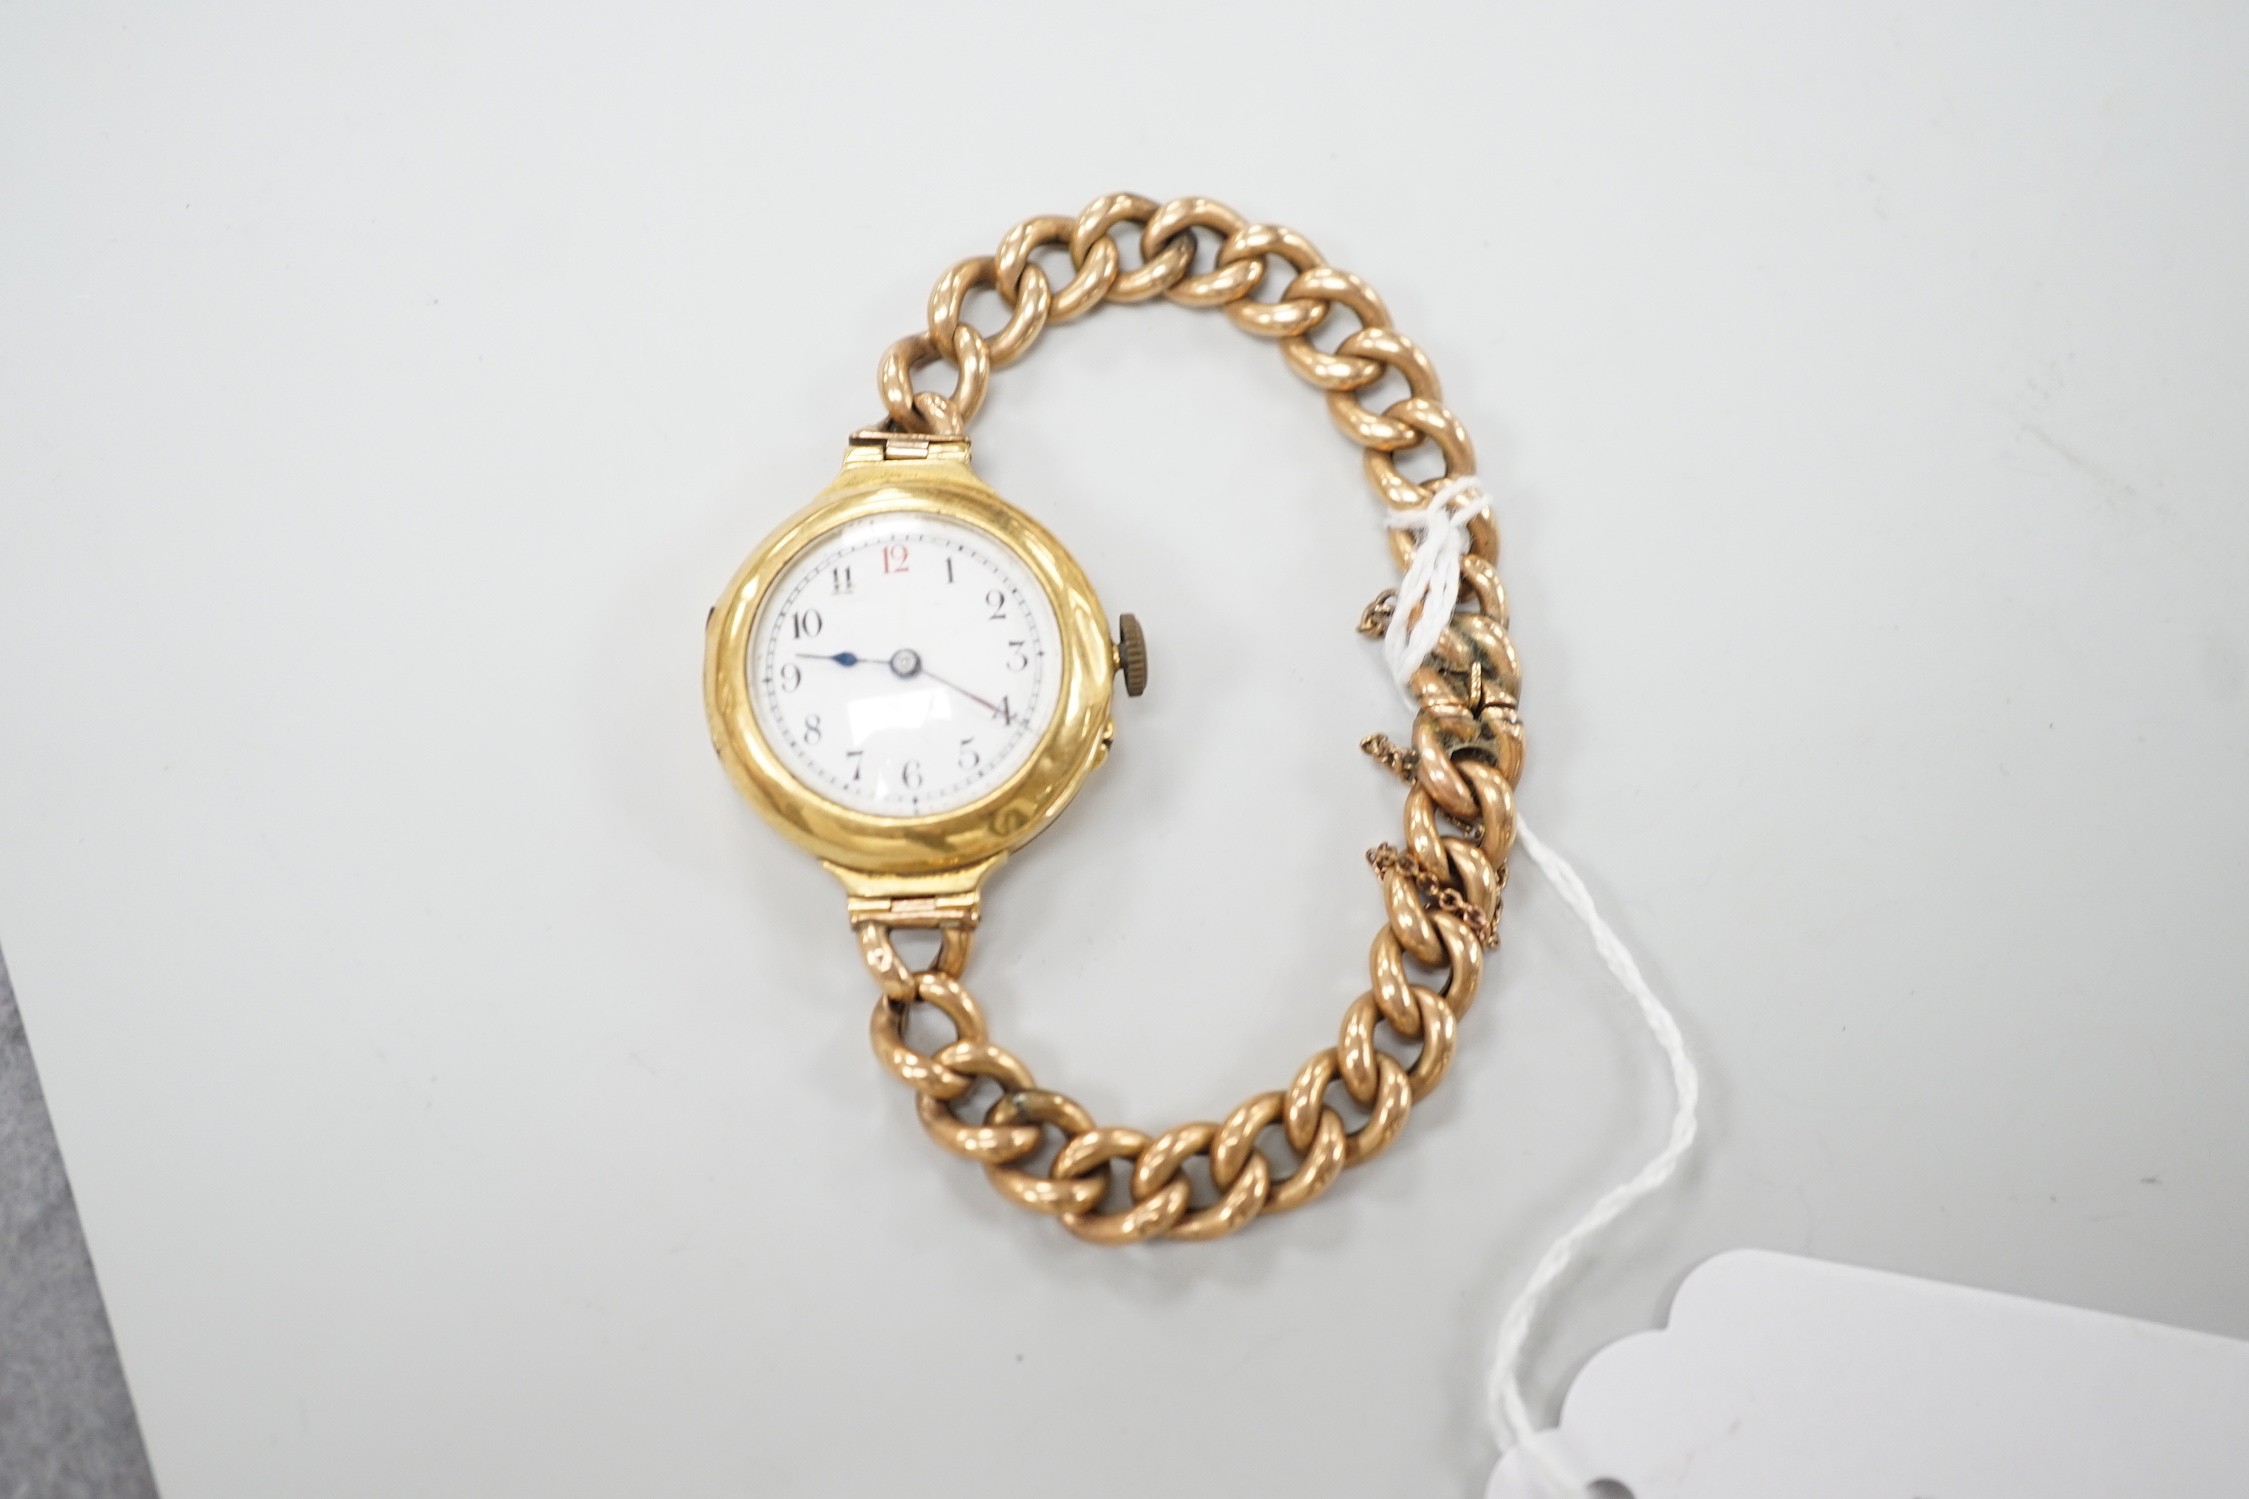 An early 20th century 18ct gold manual wind wrist watch, with Arabic dial, case diameter 27mm, on a yellow metal (stamped 15) curblink bracelet